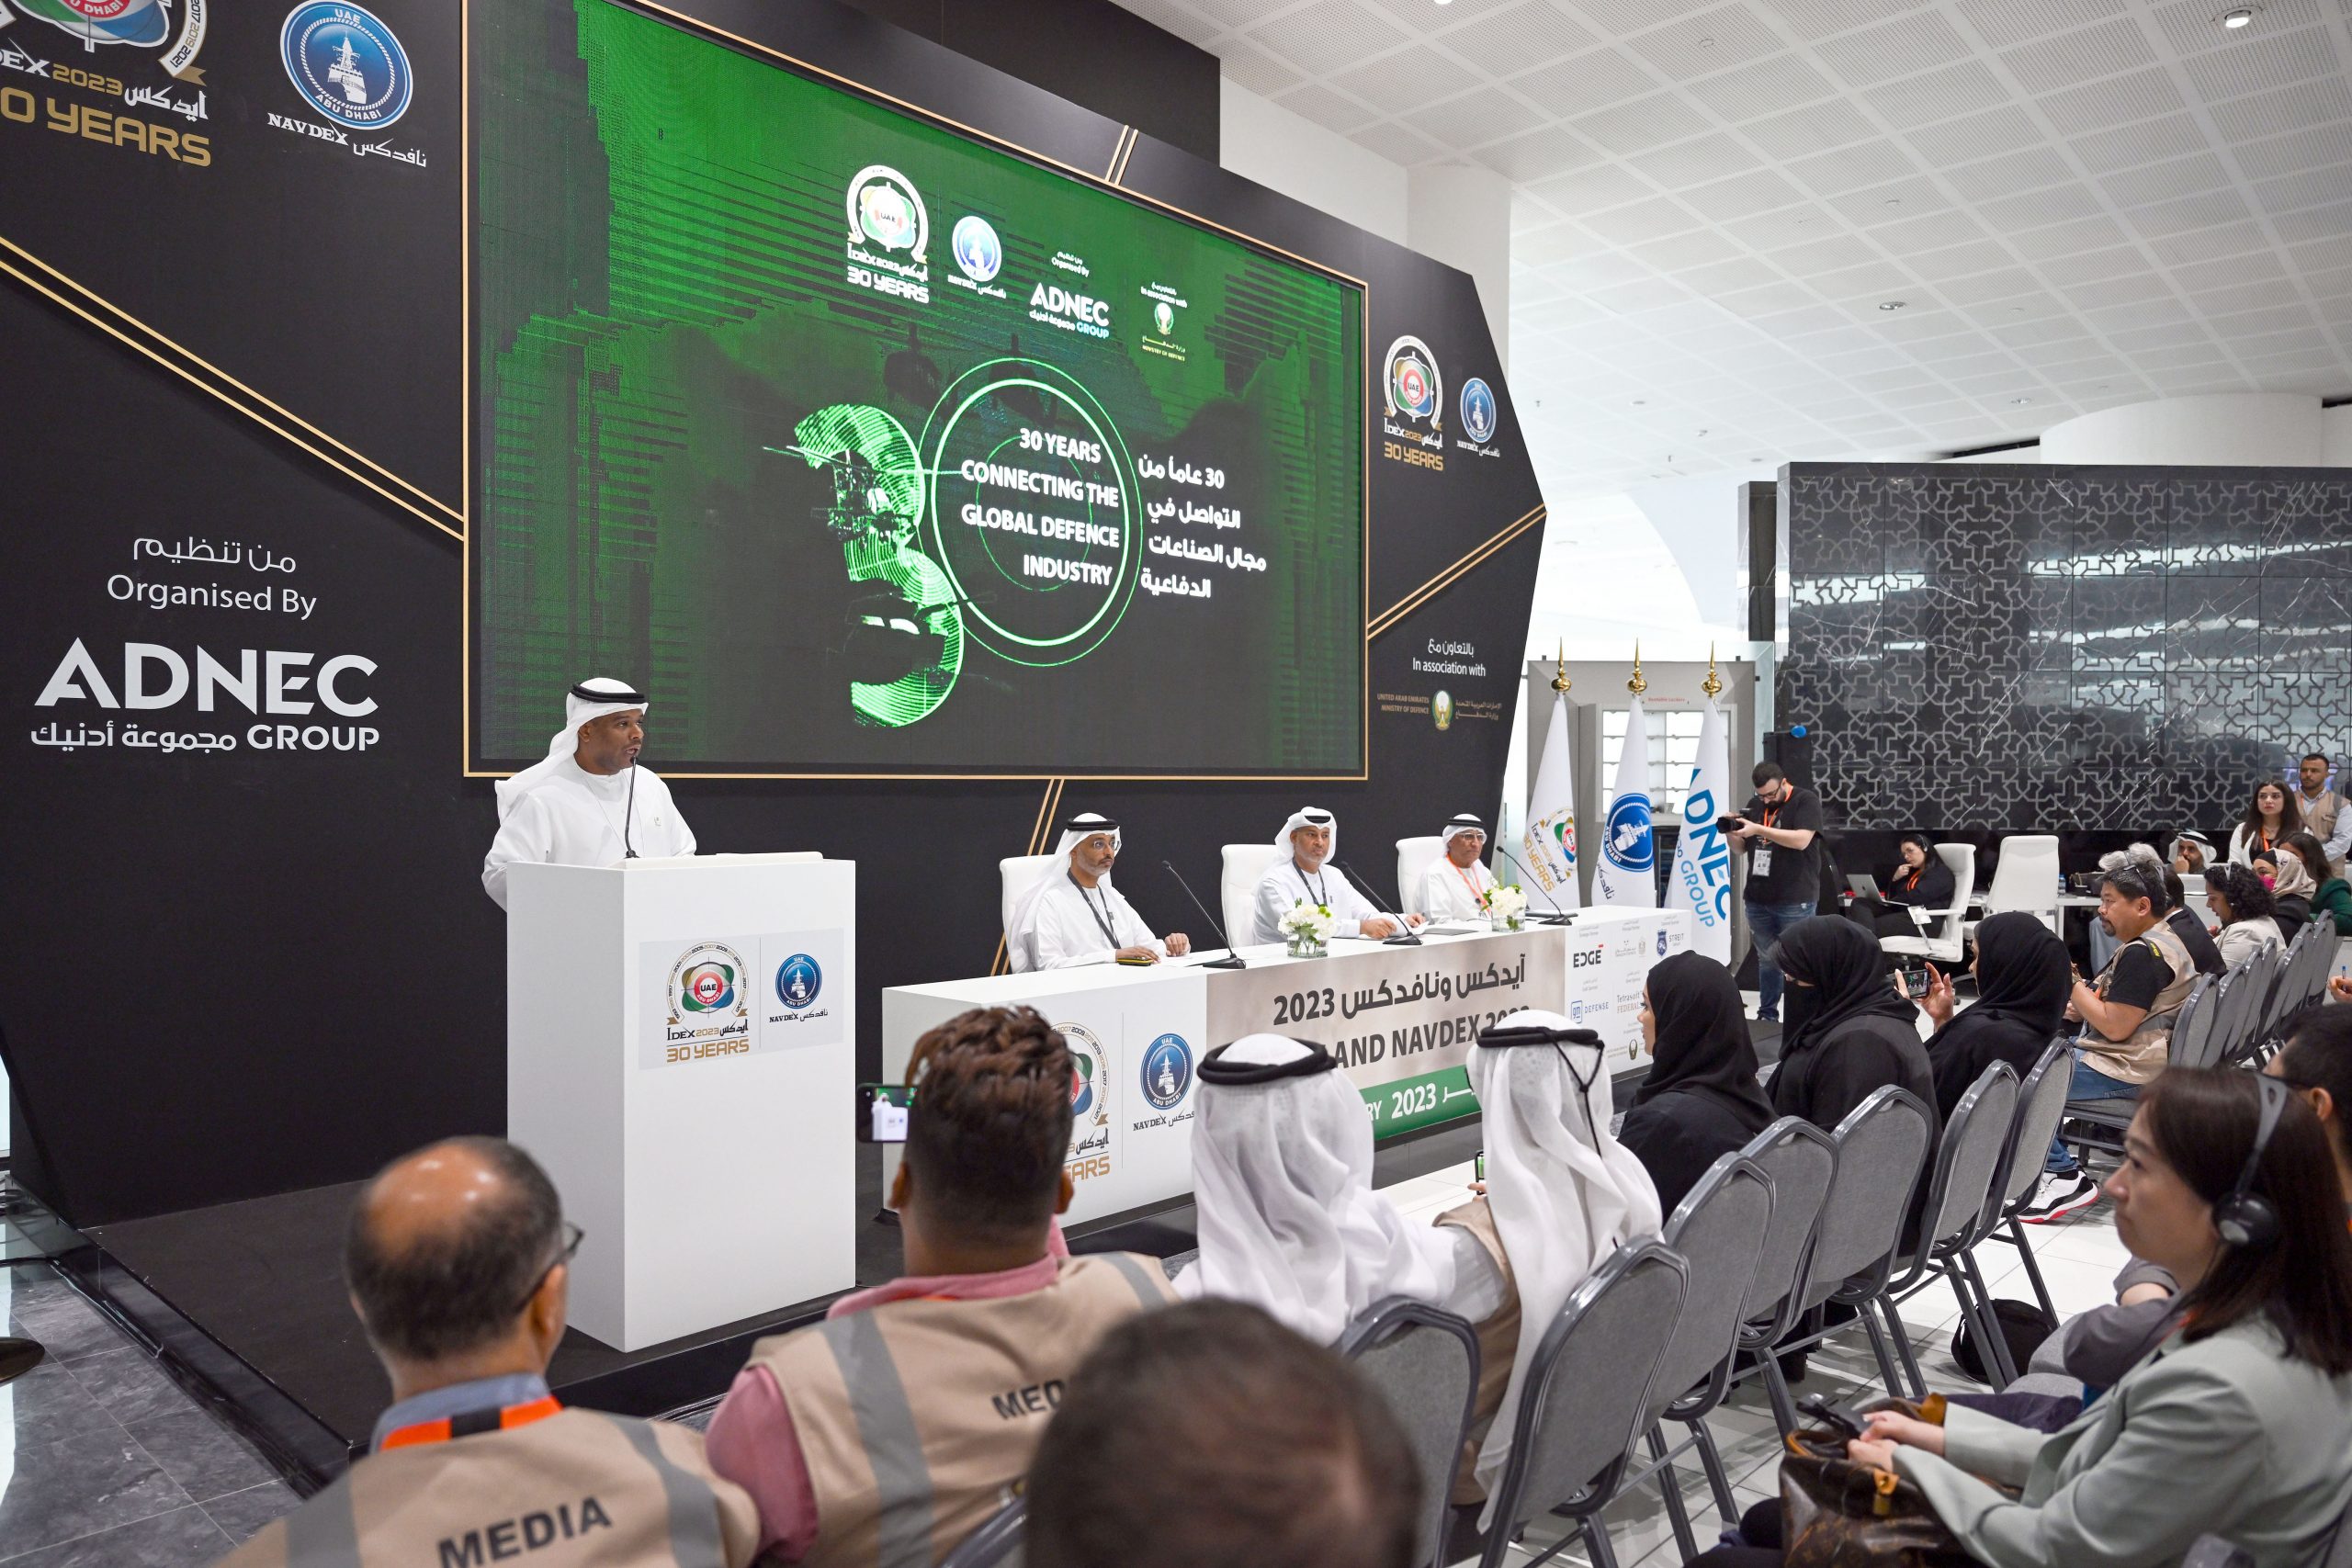 AED12.64 b worth of total deals signed on first two days of IDEX and NAVDEX 2023